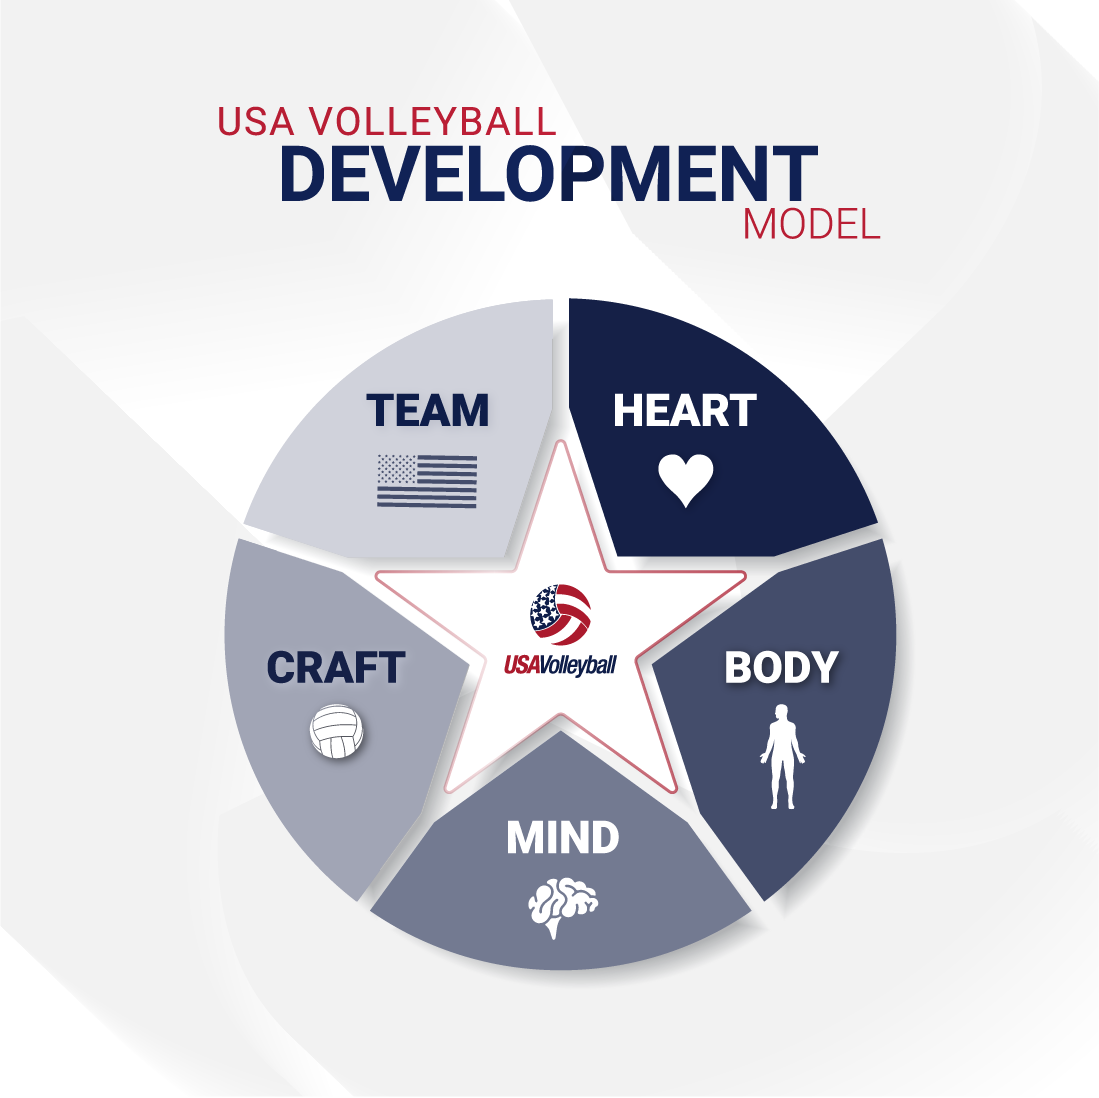 USA Volleyball Coach Academy | Monthly Gold Subscription